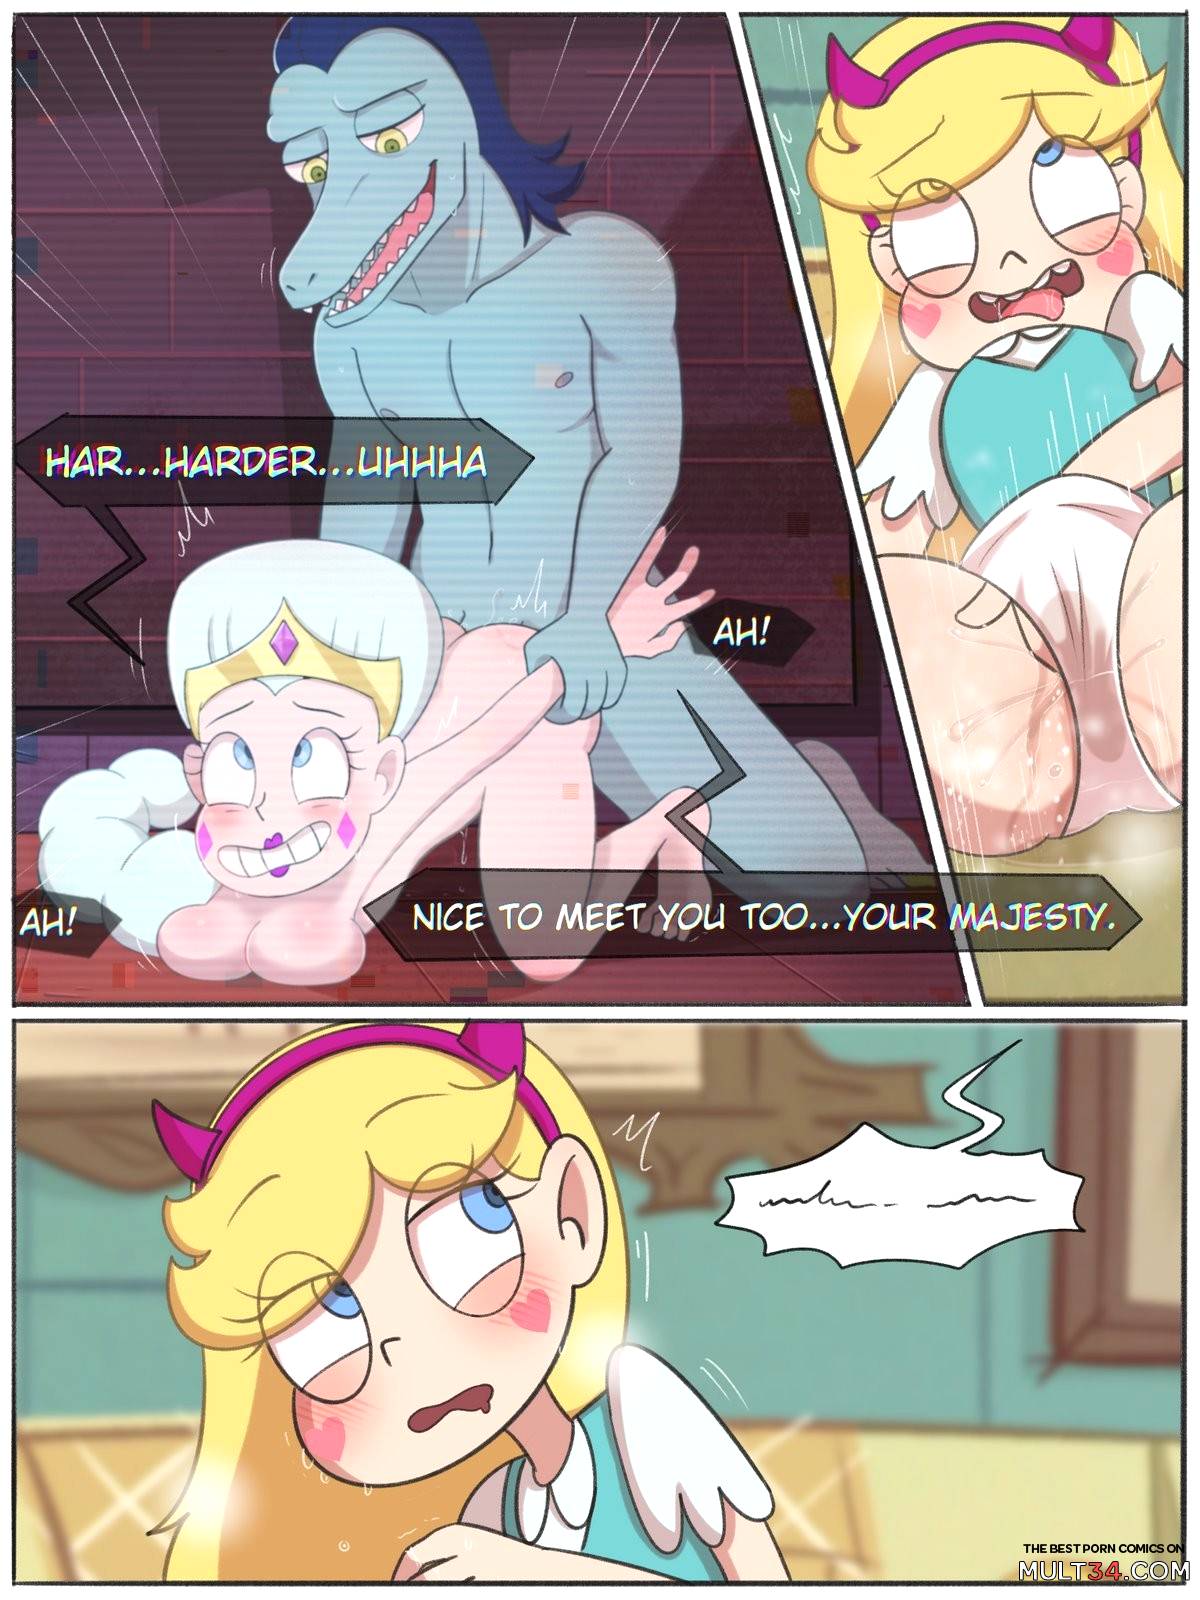 Star VS The forces of Evil comics page 14